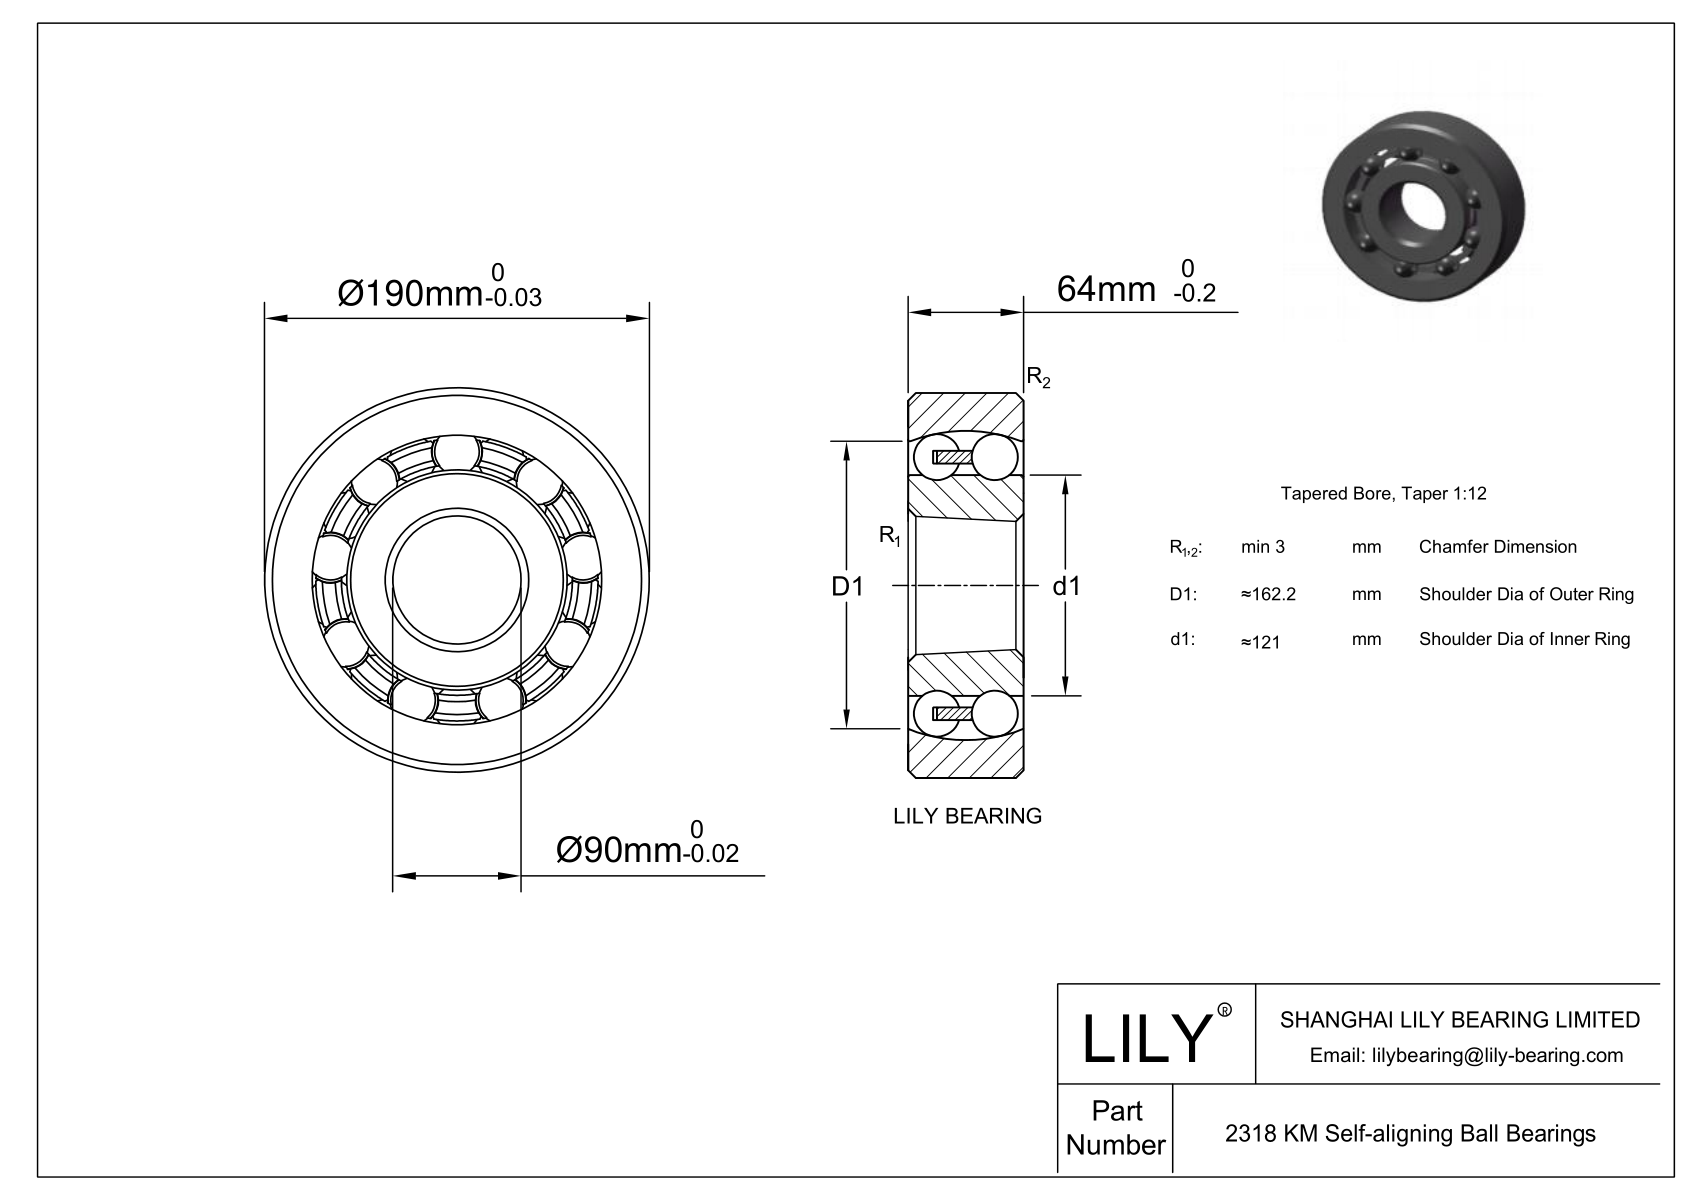 S2318 KM Stainless Steel Self Aligning Ball Bearings cad drawing